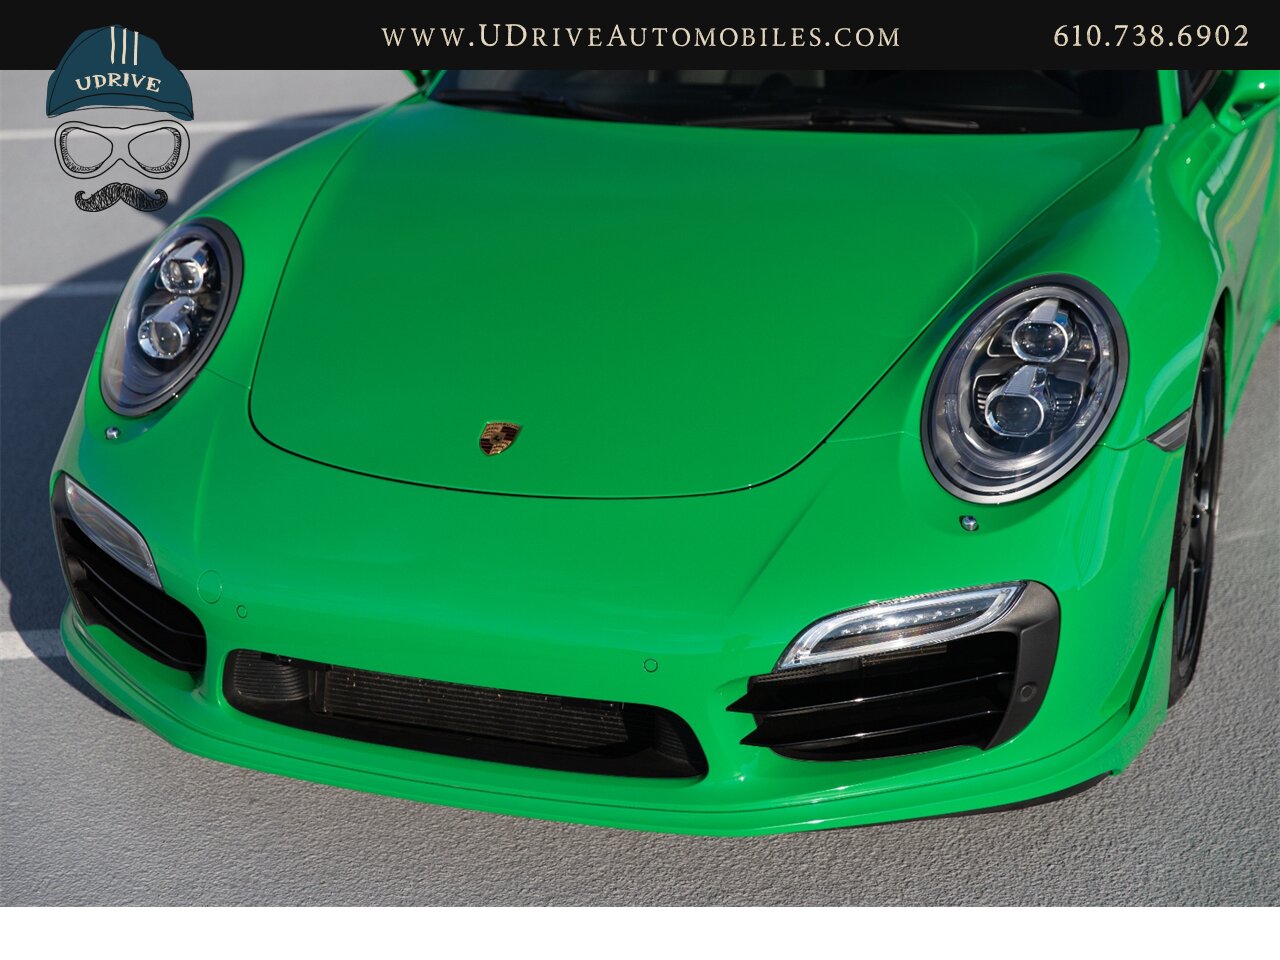 2016 Porsche 911 Turbo S PTS Viper Green Aerokit $203k MSRP  Painted Side Skirts Painted Grilles Wheels in Black - Photo 9 - West Chester, PA 19382